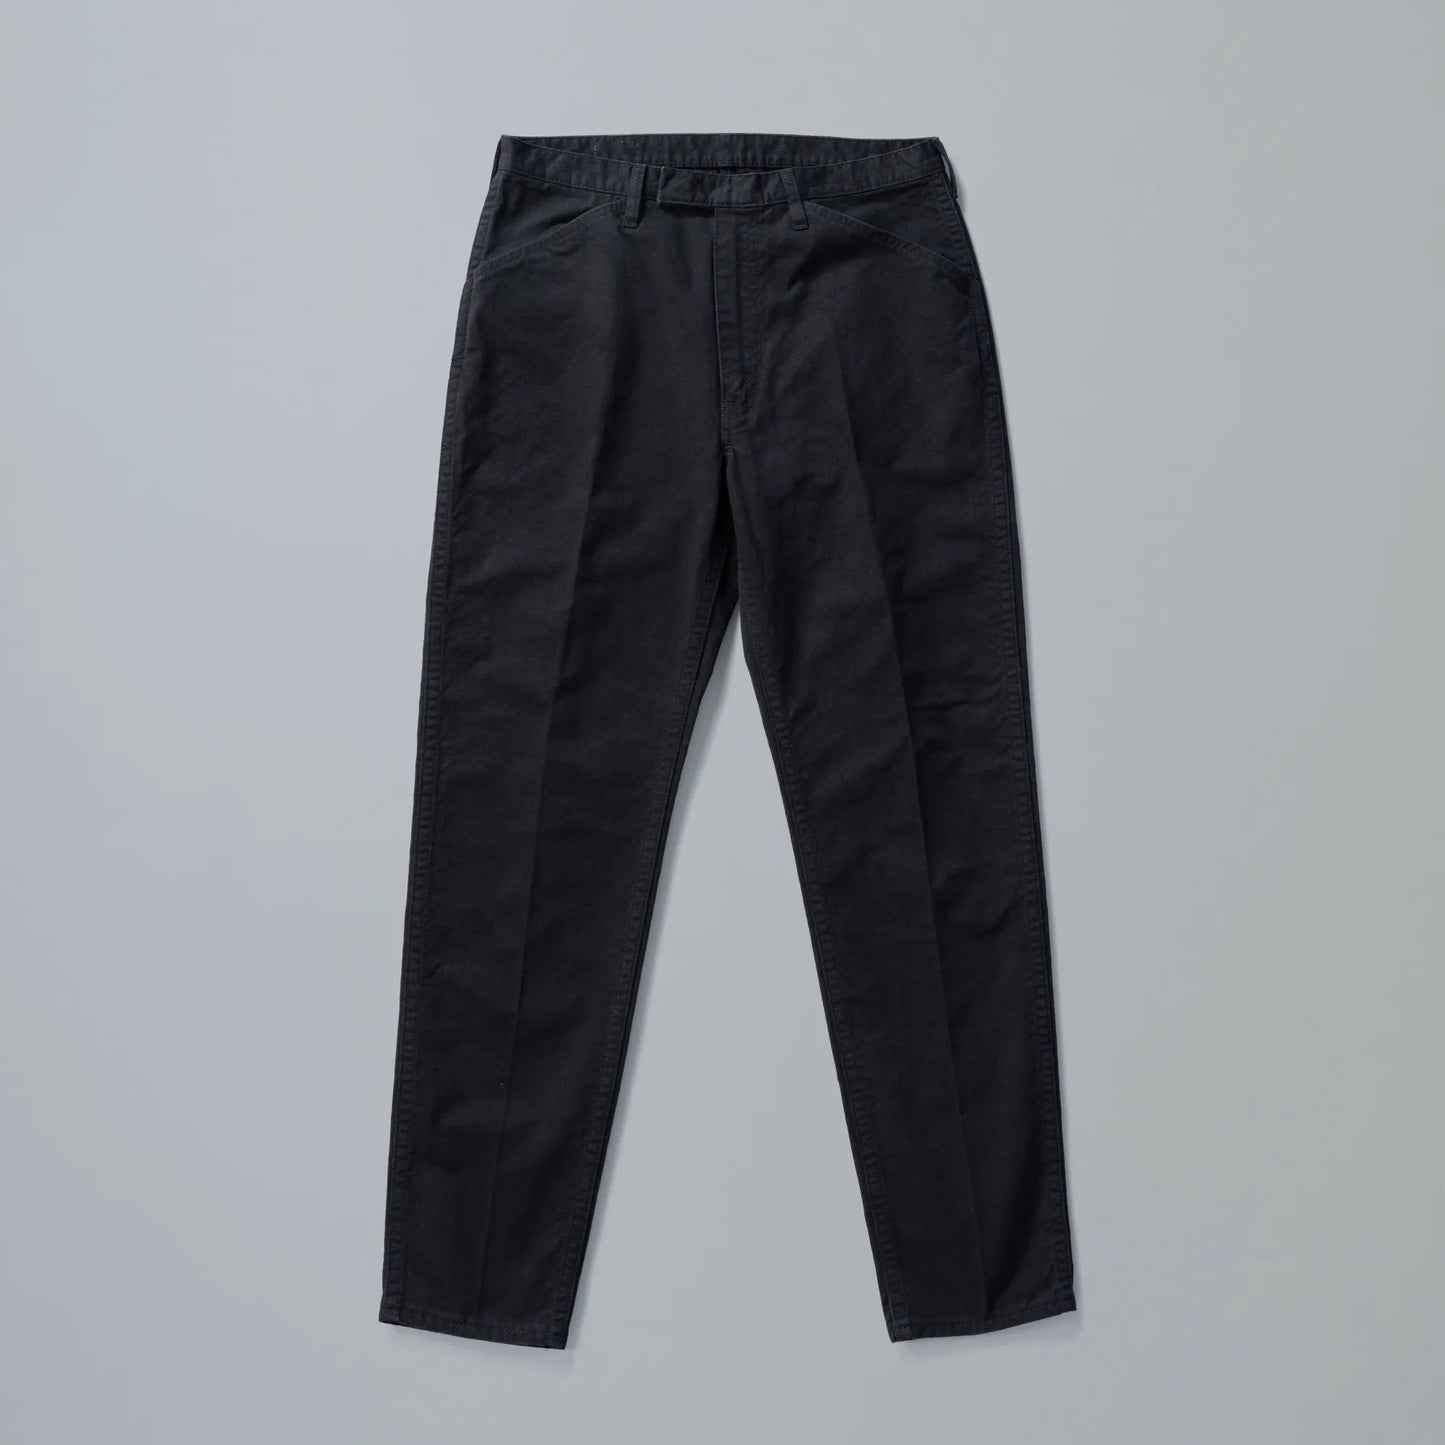 #022 LV MCQUEEN PANTS ONE-WASHED BEG